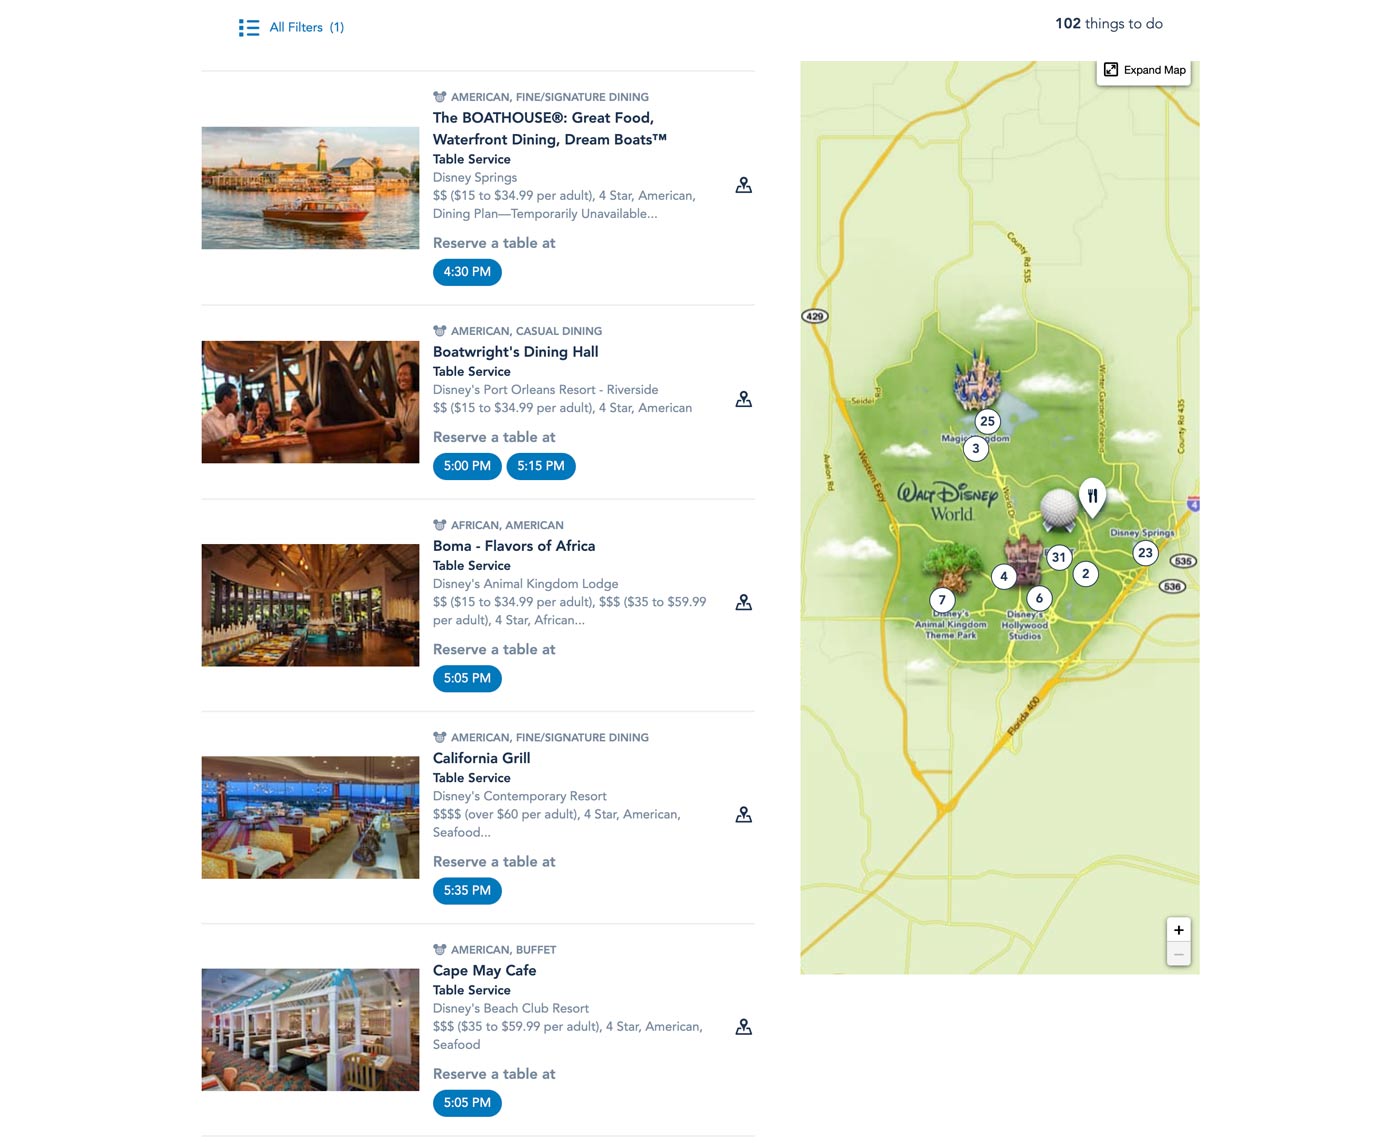 Disney World Dining Reservation Website Search Results